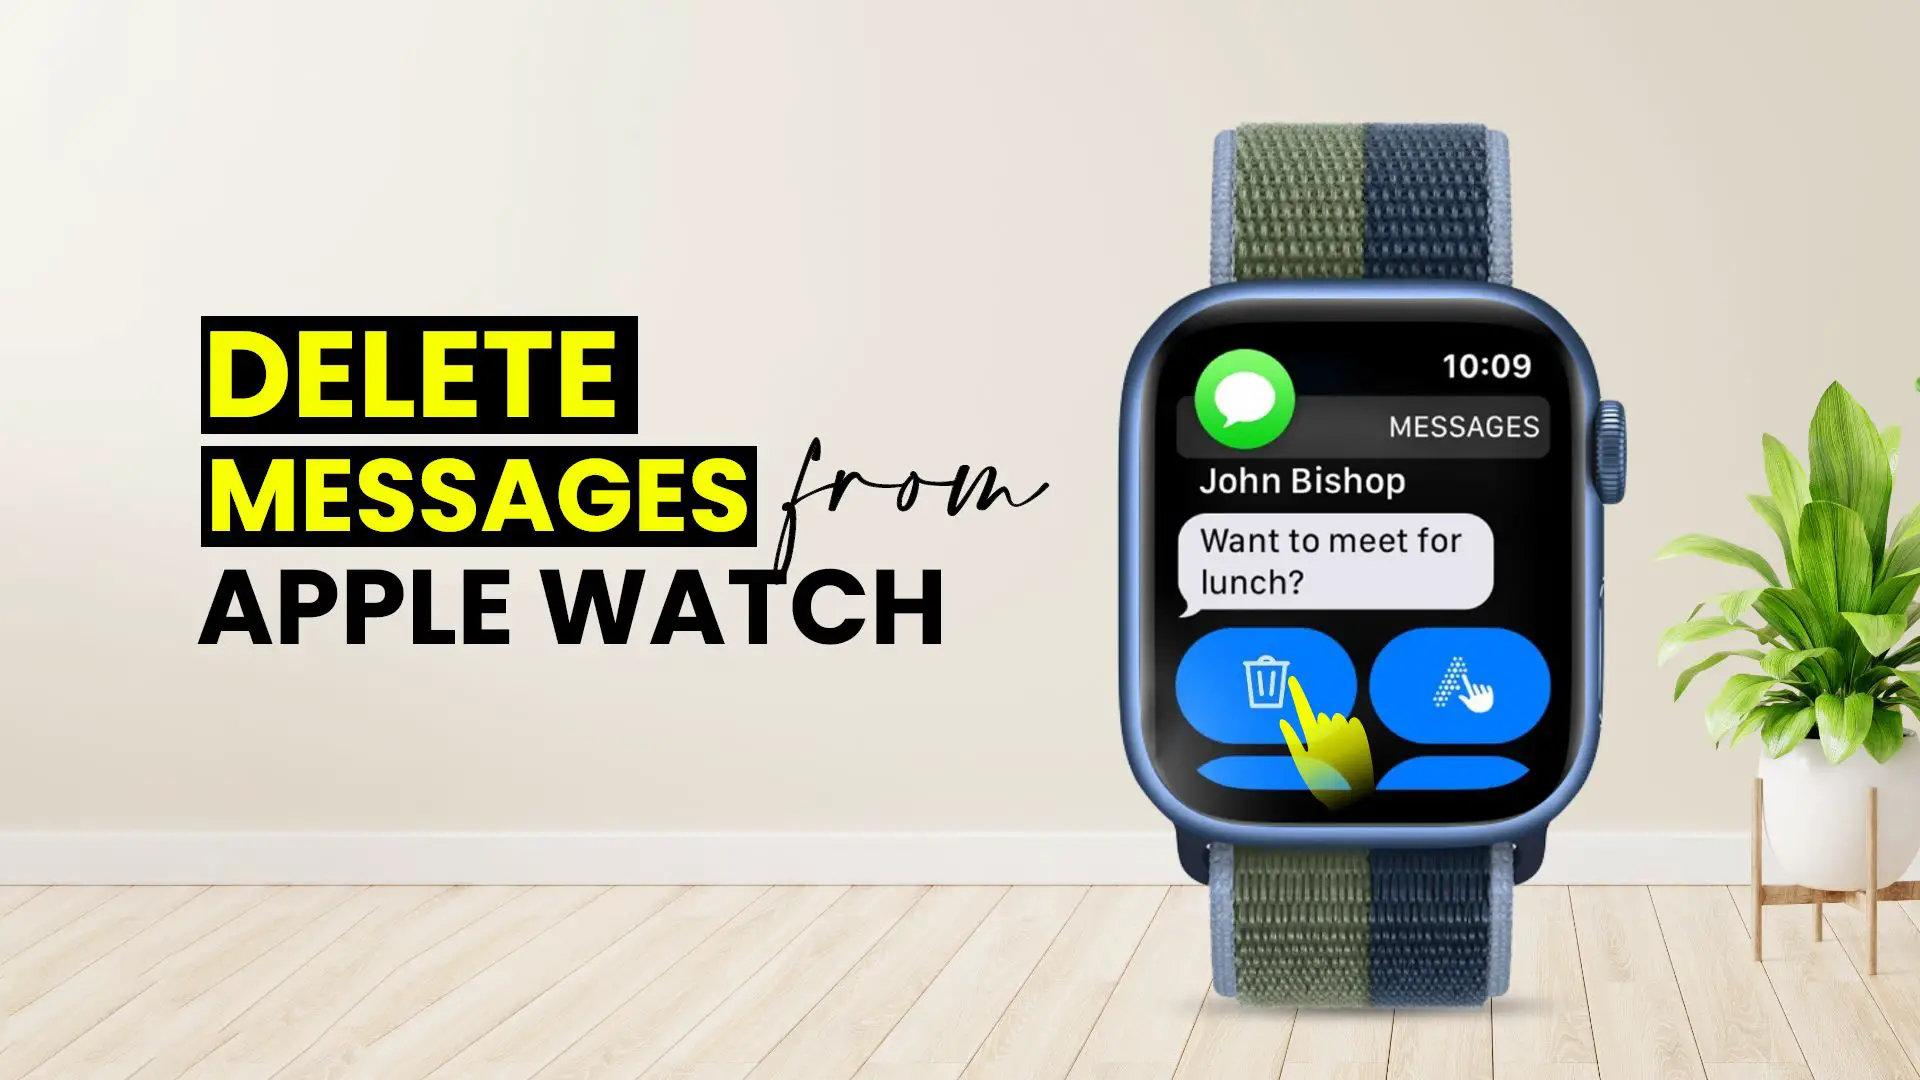 How to delete messages from apple watch